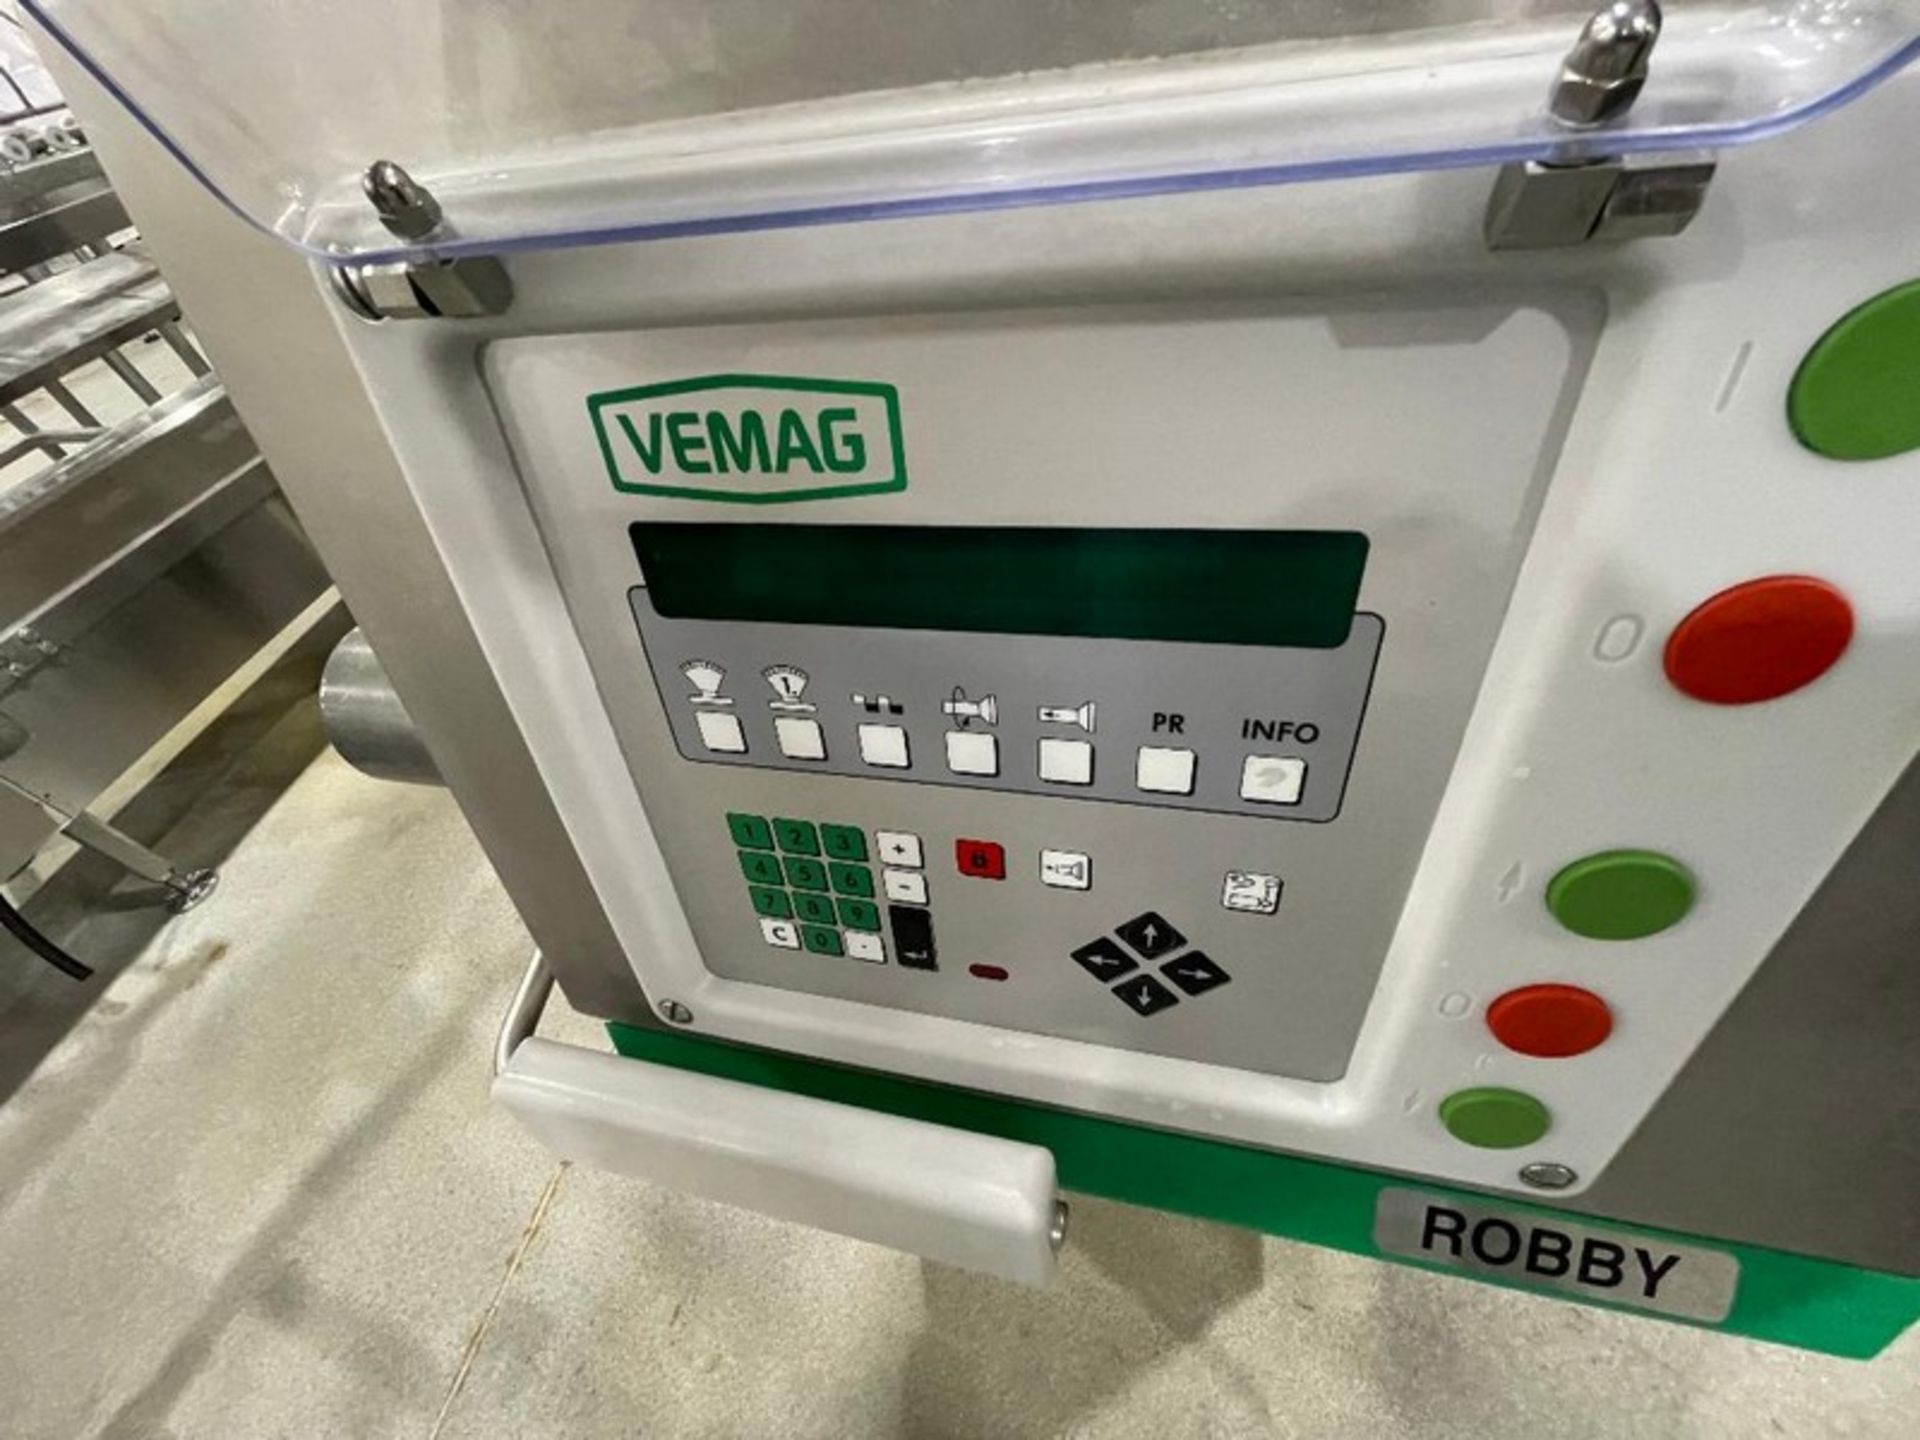 Vemag Robby All S/S Sanitary System, Mfg. 2012 with Touchpad Digital Controls, Numerous New Spare - Image 7 of 9